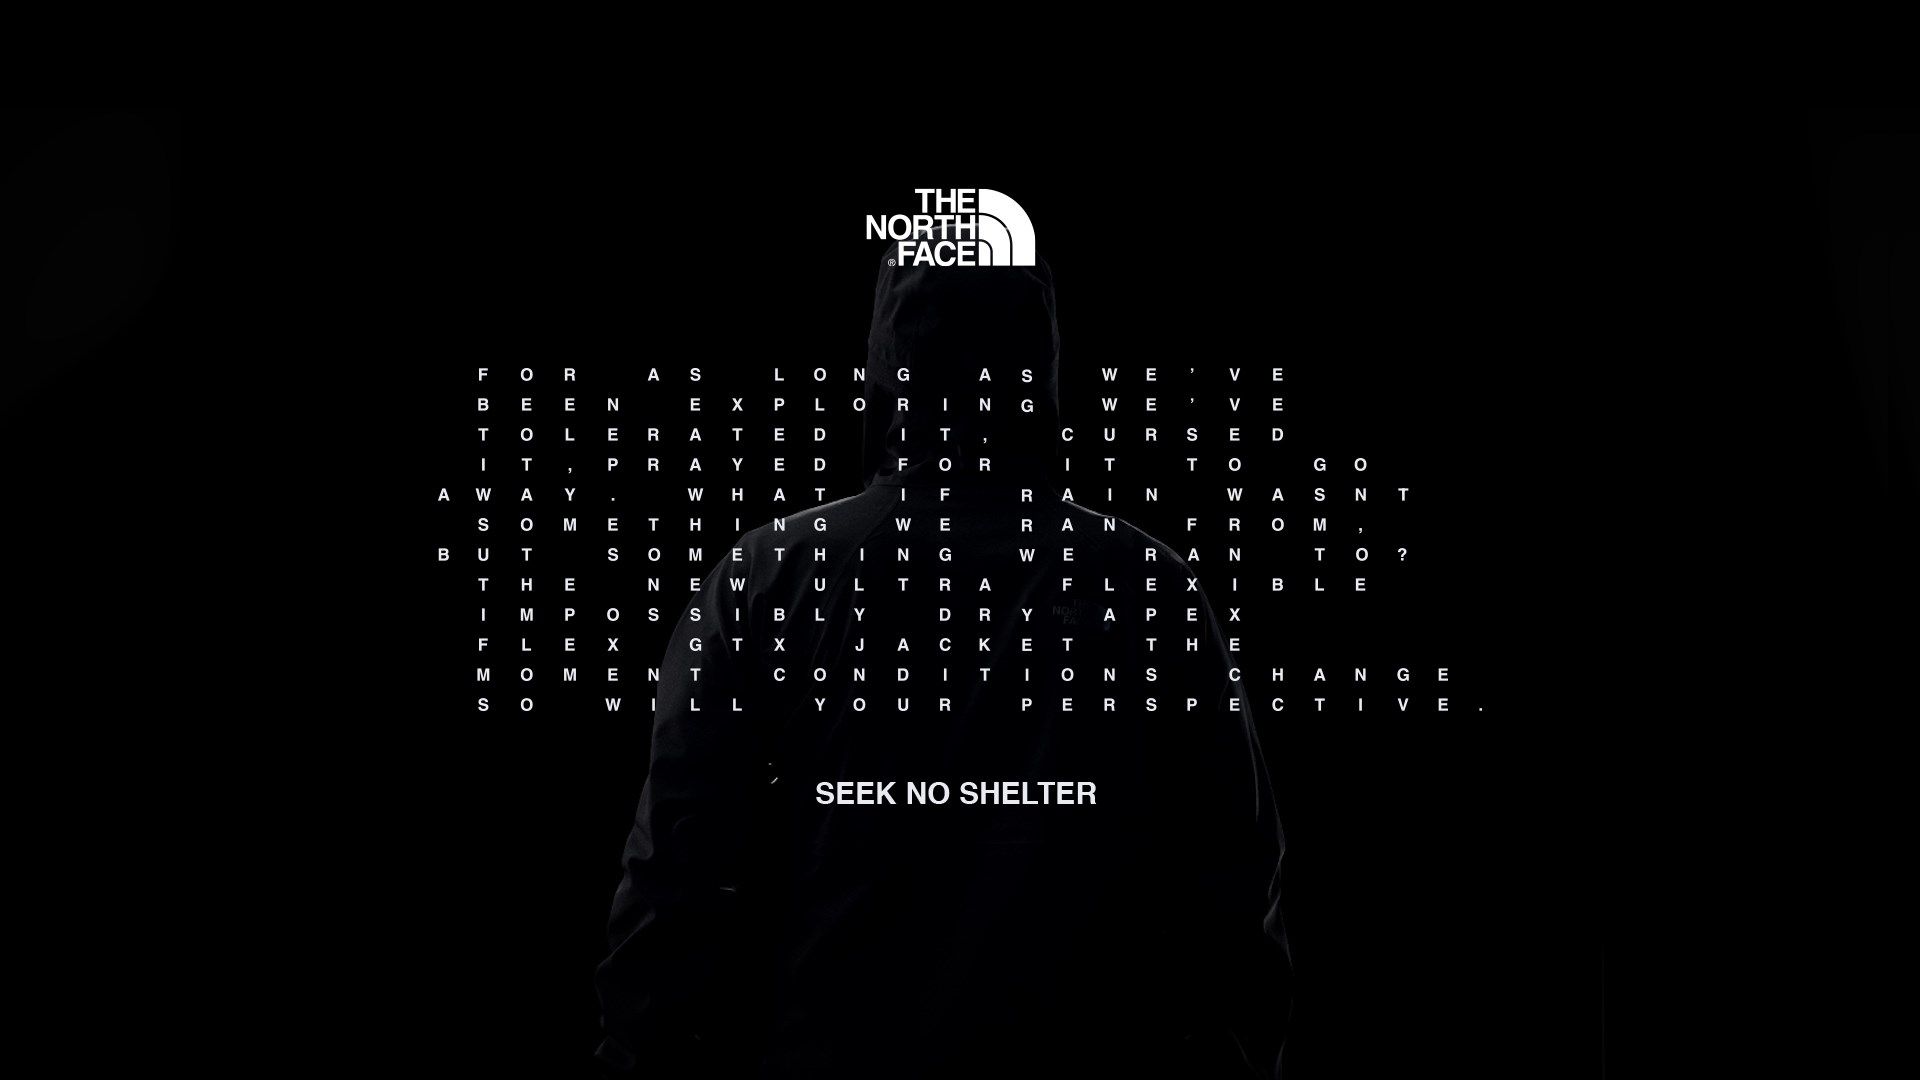 North Face Wallpapers